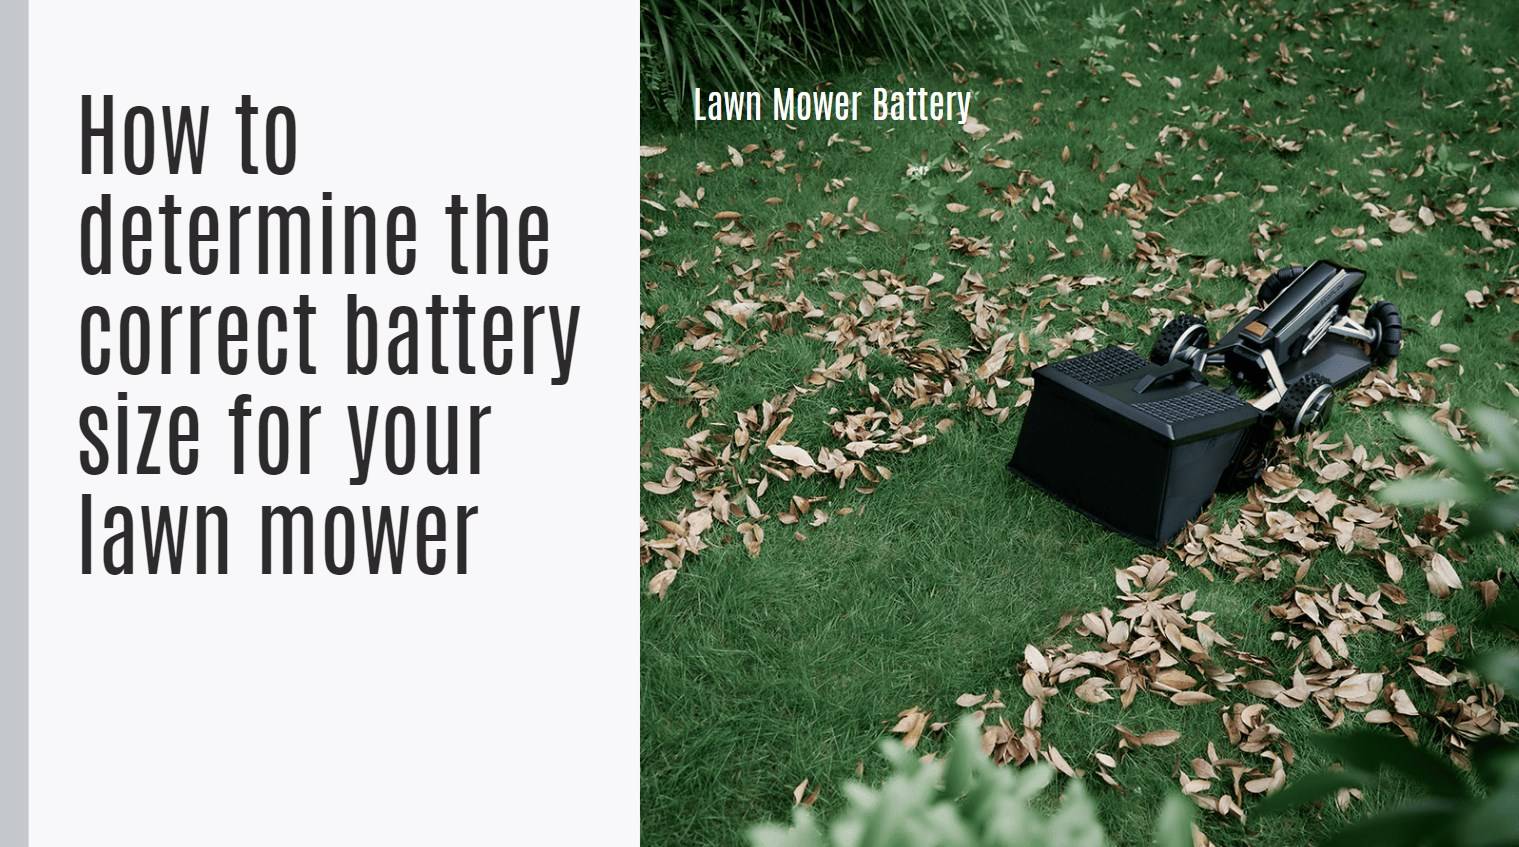 How to determine the correct battery size for your lawn mower. Does it matter what battery I put in my lawn mower?